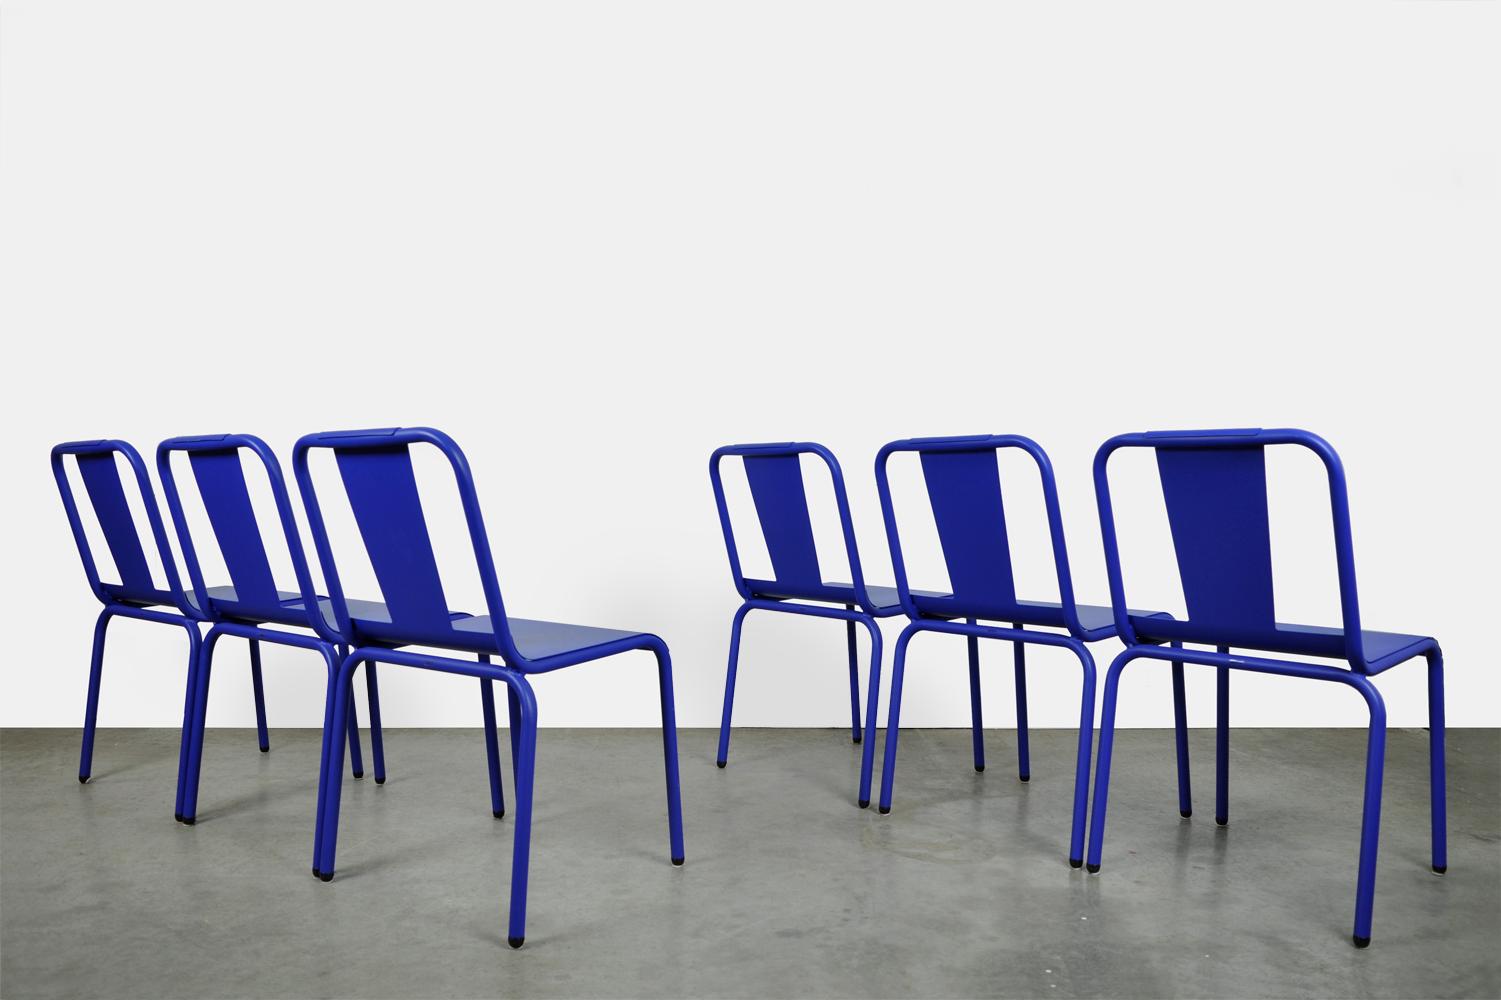 Set of 6 dining chairs, model Nápoles, produced by Isimar, Spain 2000. Aluminum chairs with a blue polyester powder coating (Ral 5002). The design chairs can therefore be used indoors and outdoors. Made from 100% recycled material. Chairs are marked.